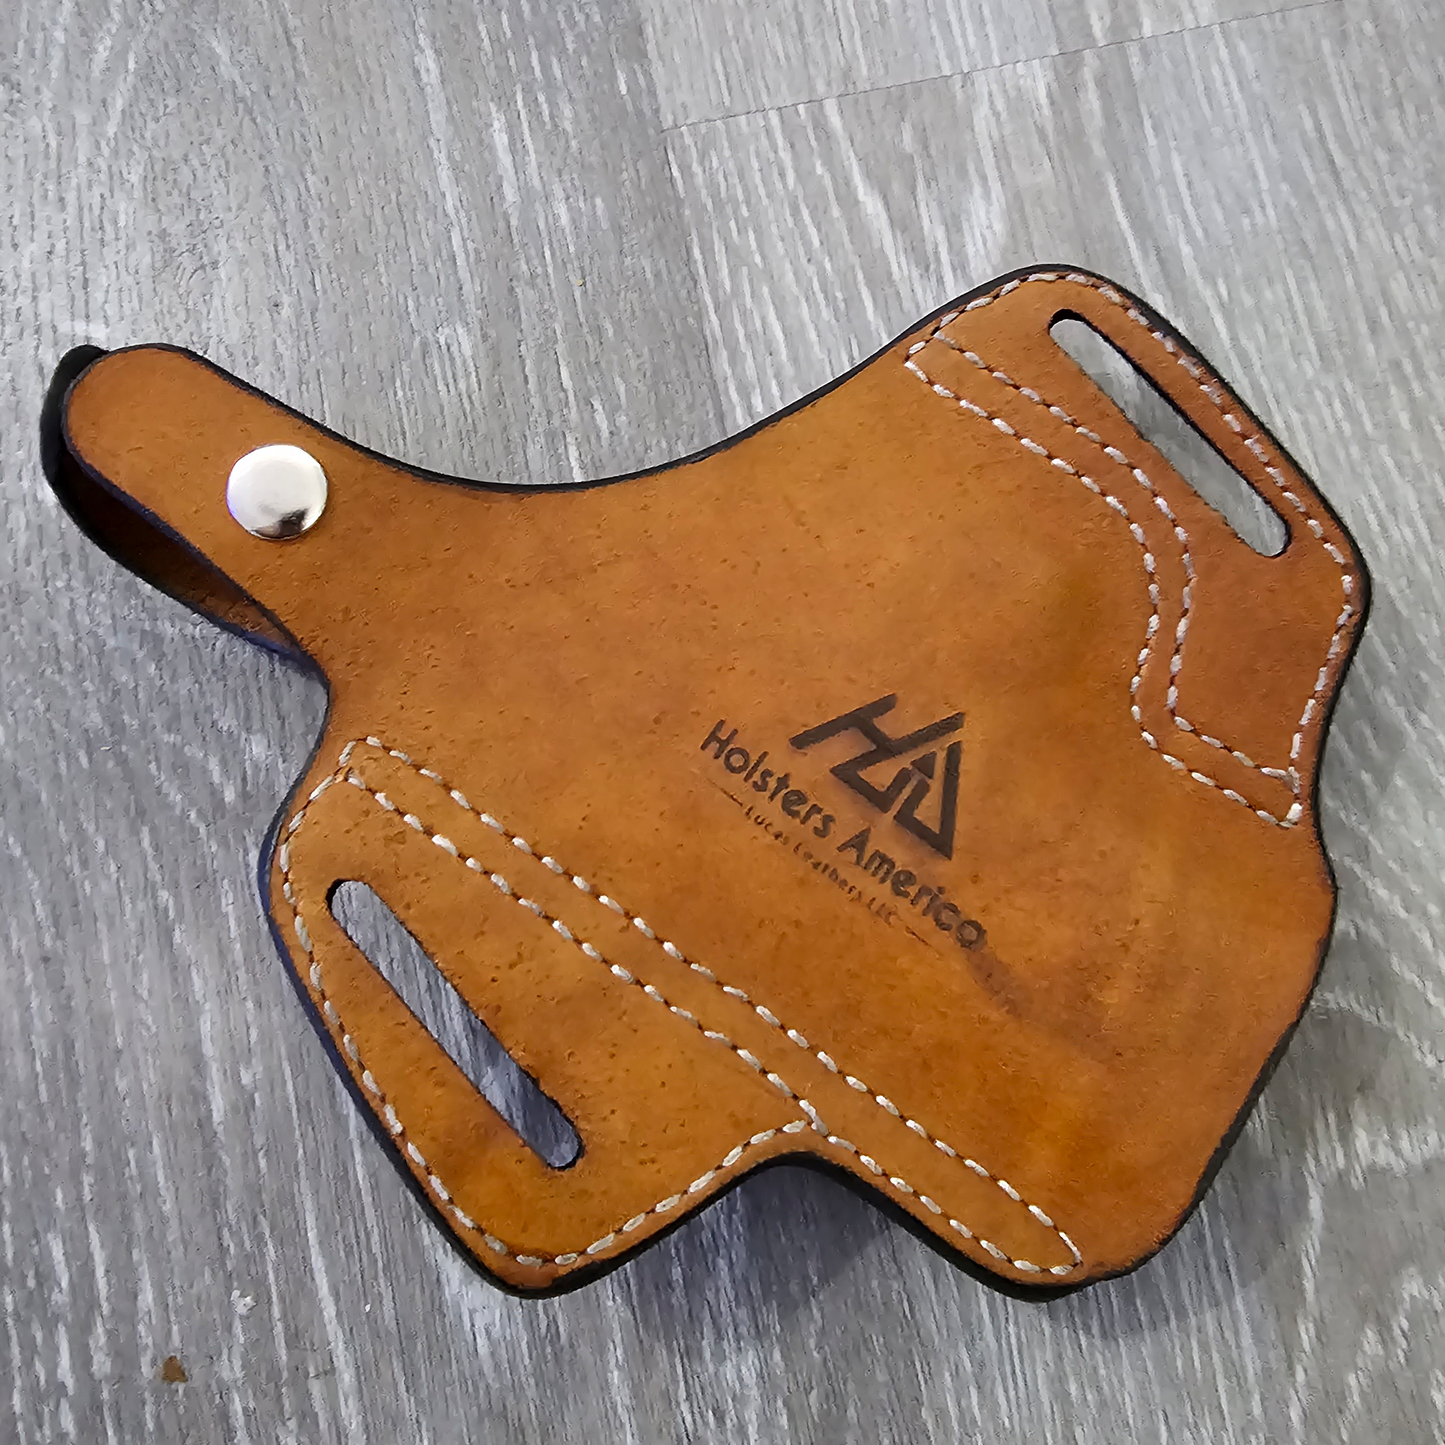 Leather Holsters & Belts